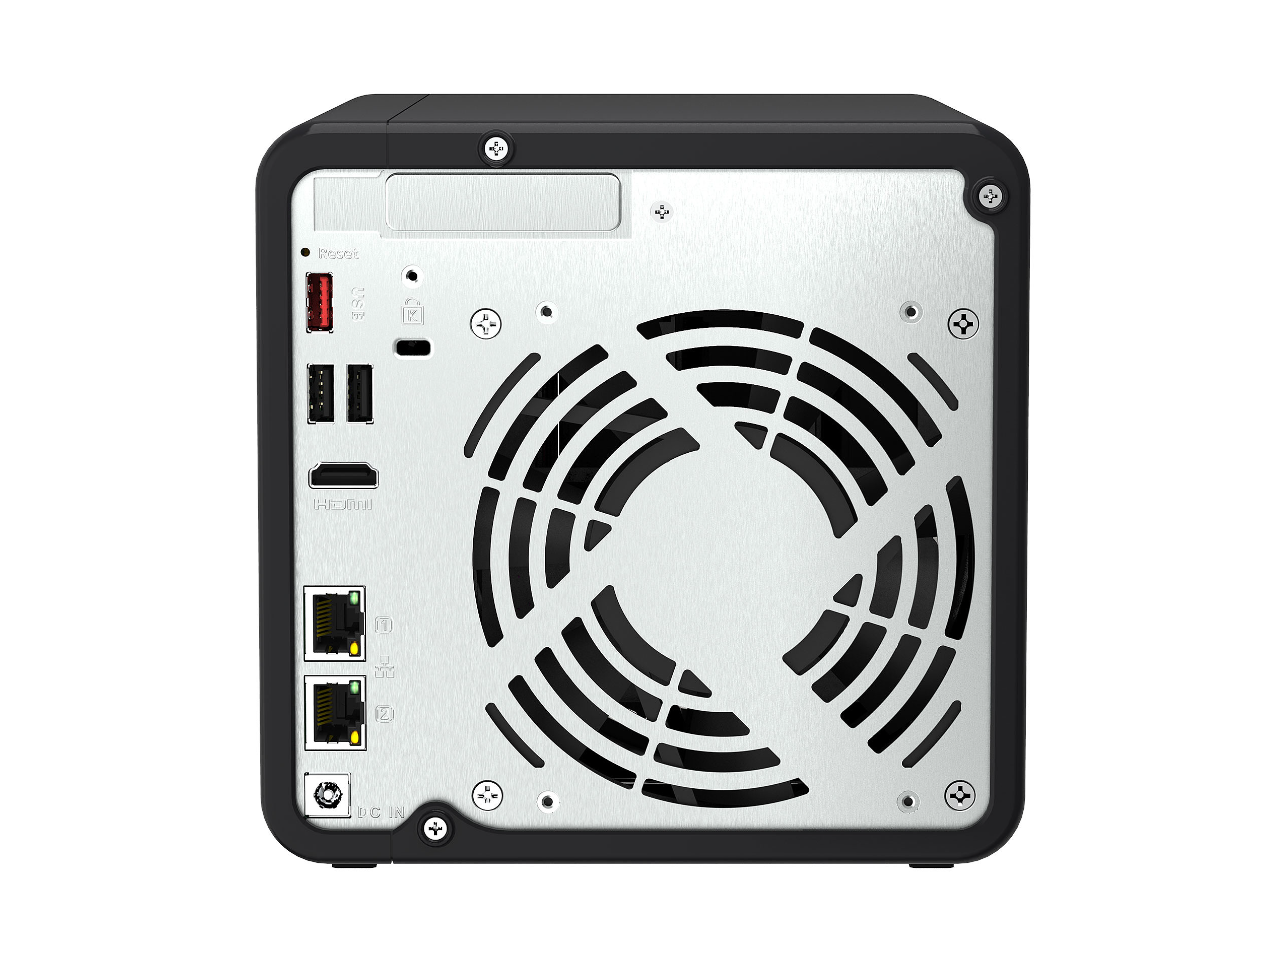 QNAP TS-464 4-Bay NAS with 16GB RAM and 12TB (4 x 3TB) of Seagate Ironwolf NAS Drives Fully Assembled and Tested